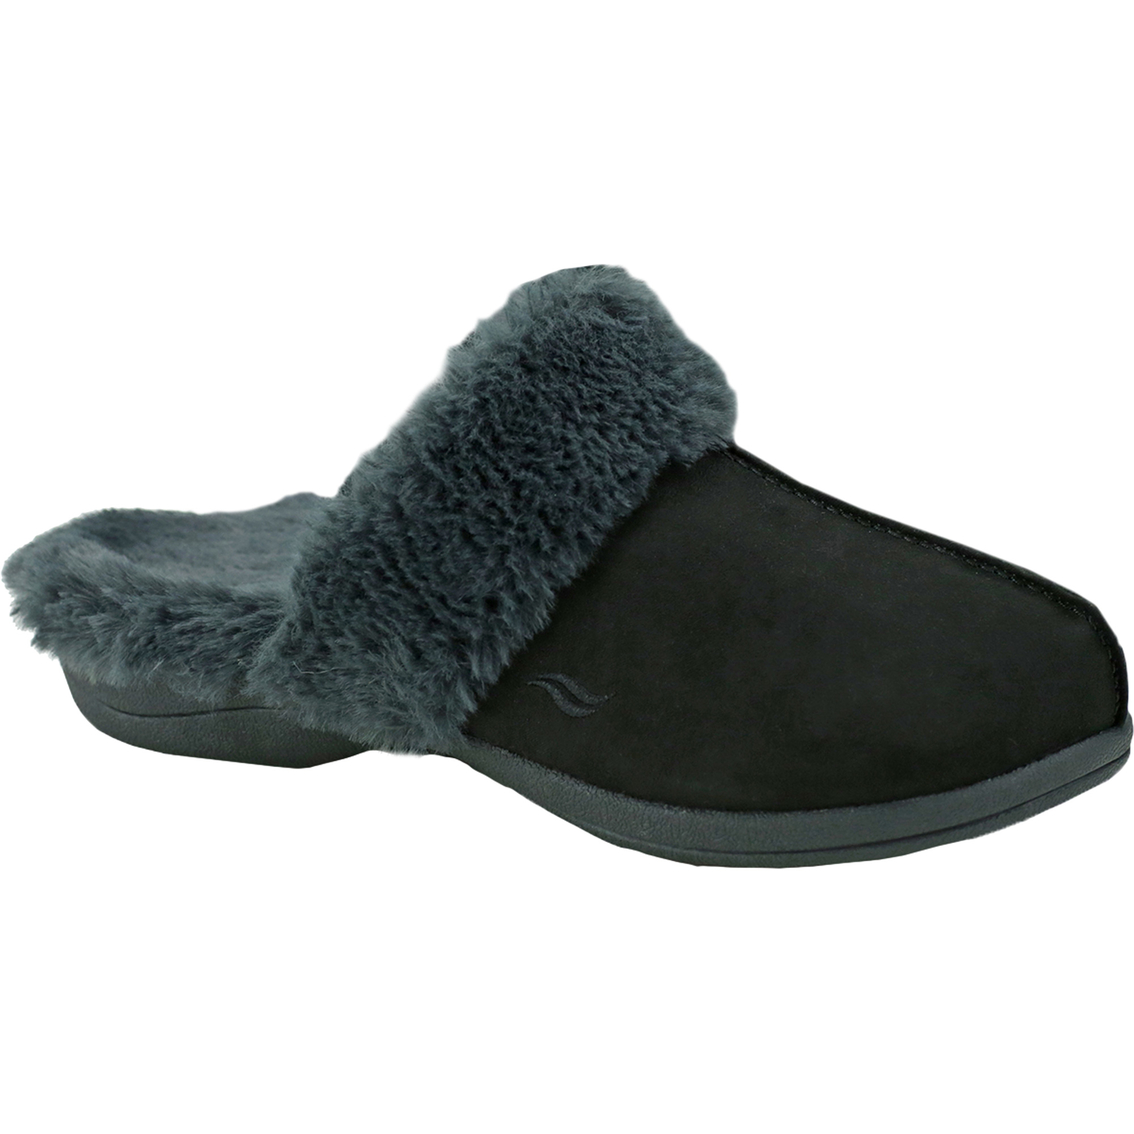 Powerstep Women's Luxe Orthotic Slippers - Image 4 of 5